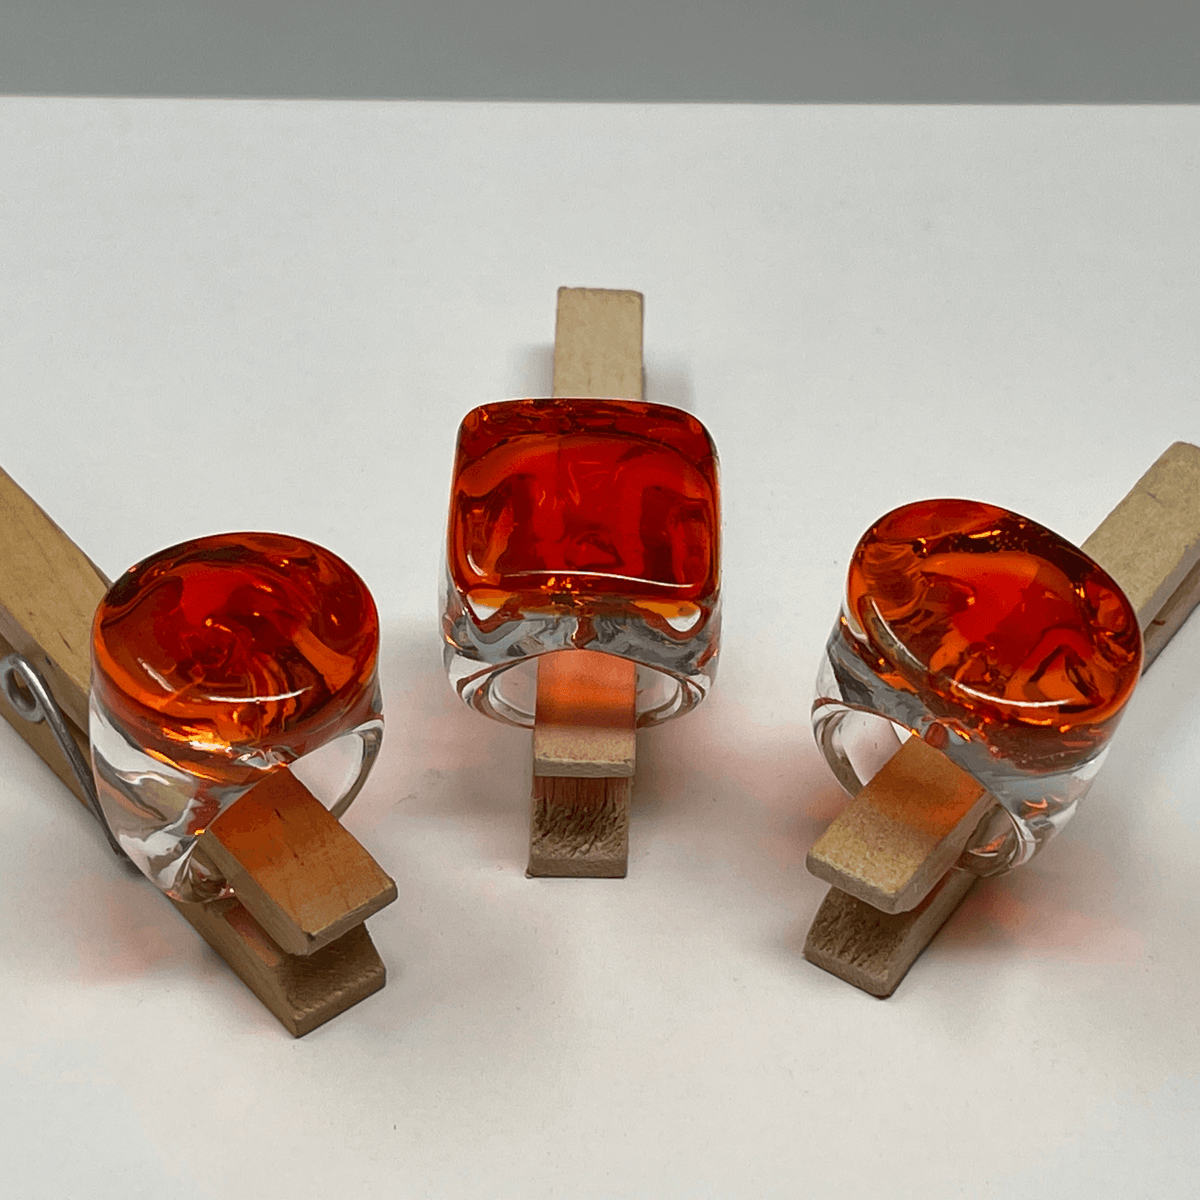 Murano Glass Statement Rings, Orange Glass, Oval, Square or Round at MyItalianDecor